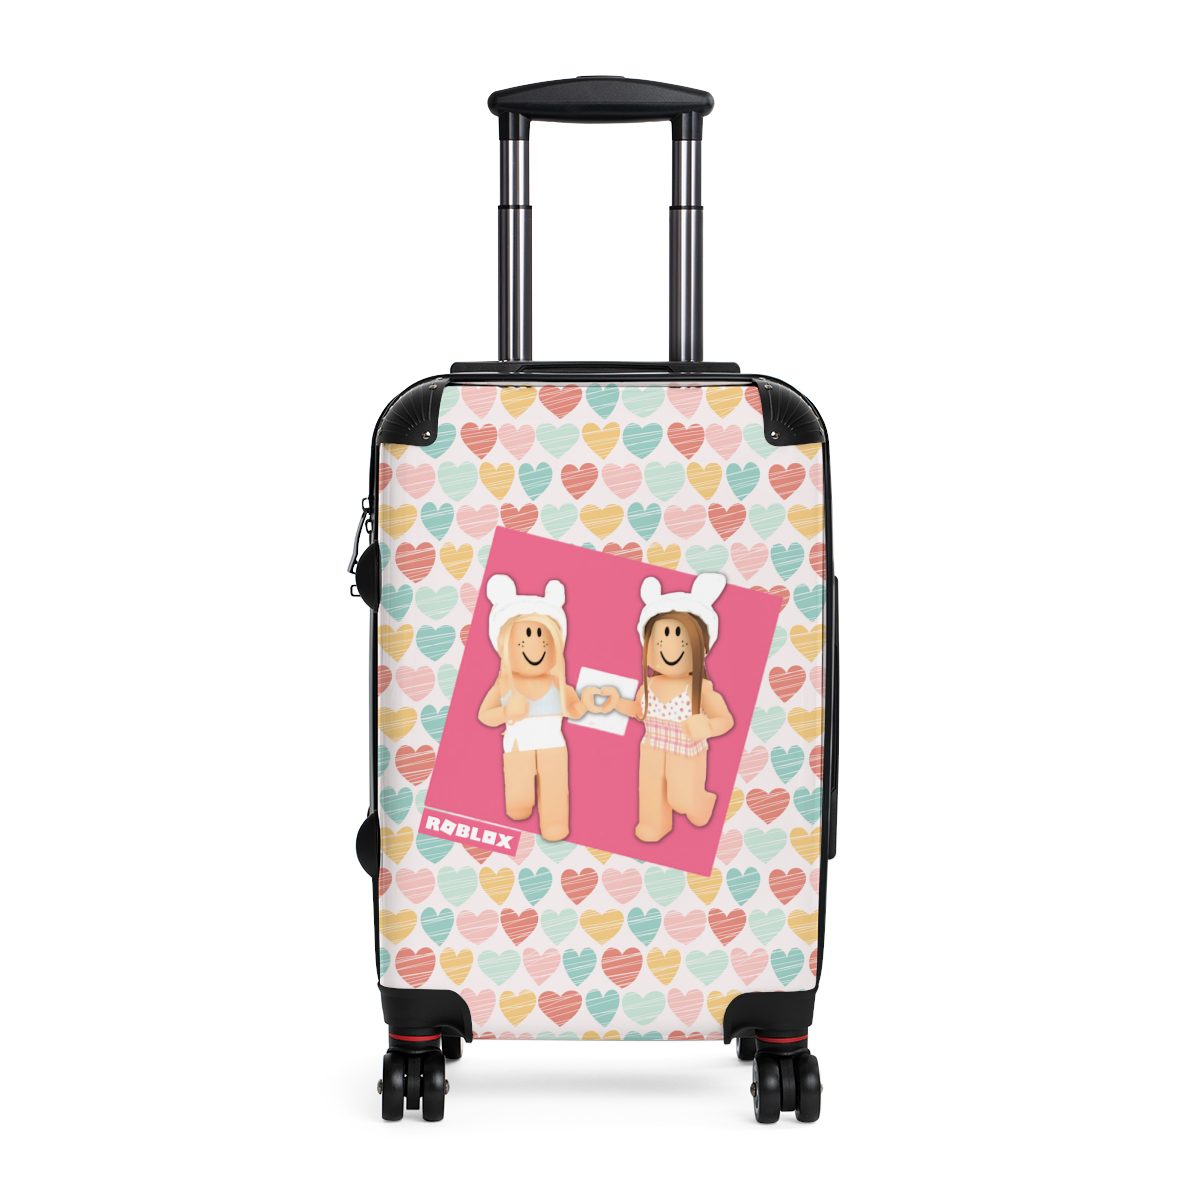 Roblox Girl’s Pastel Colors Hearts Adventure Companion: Carry-On Suitcase Cool Kiddo 10